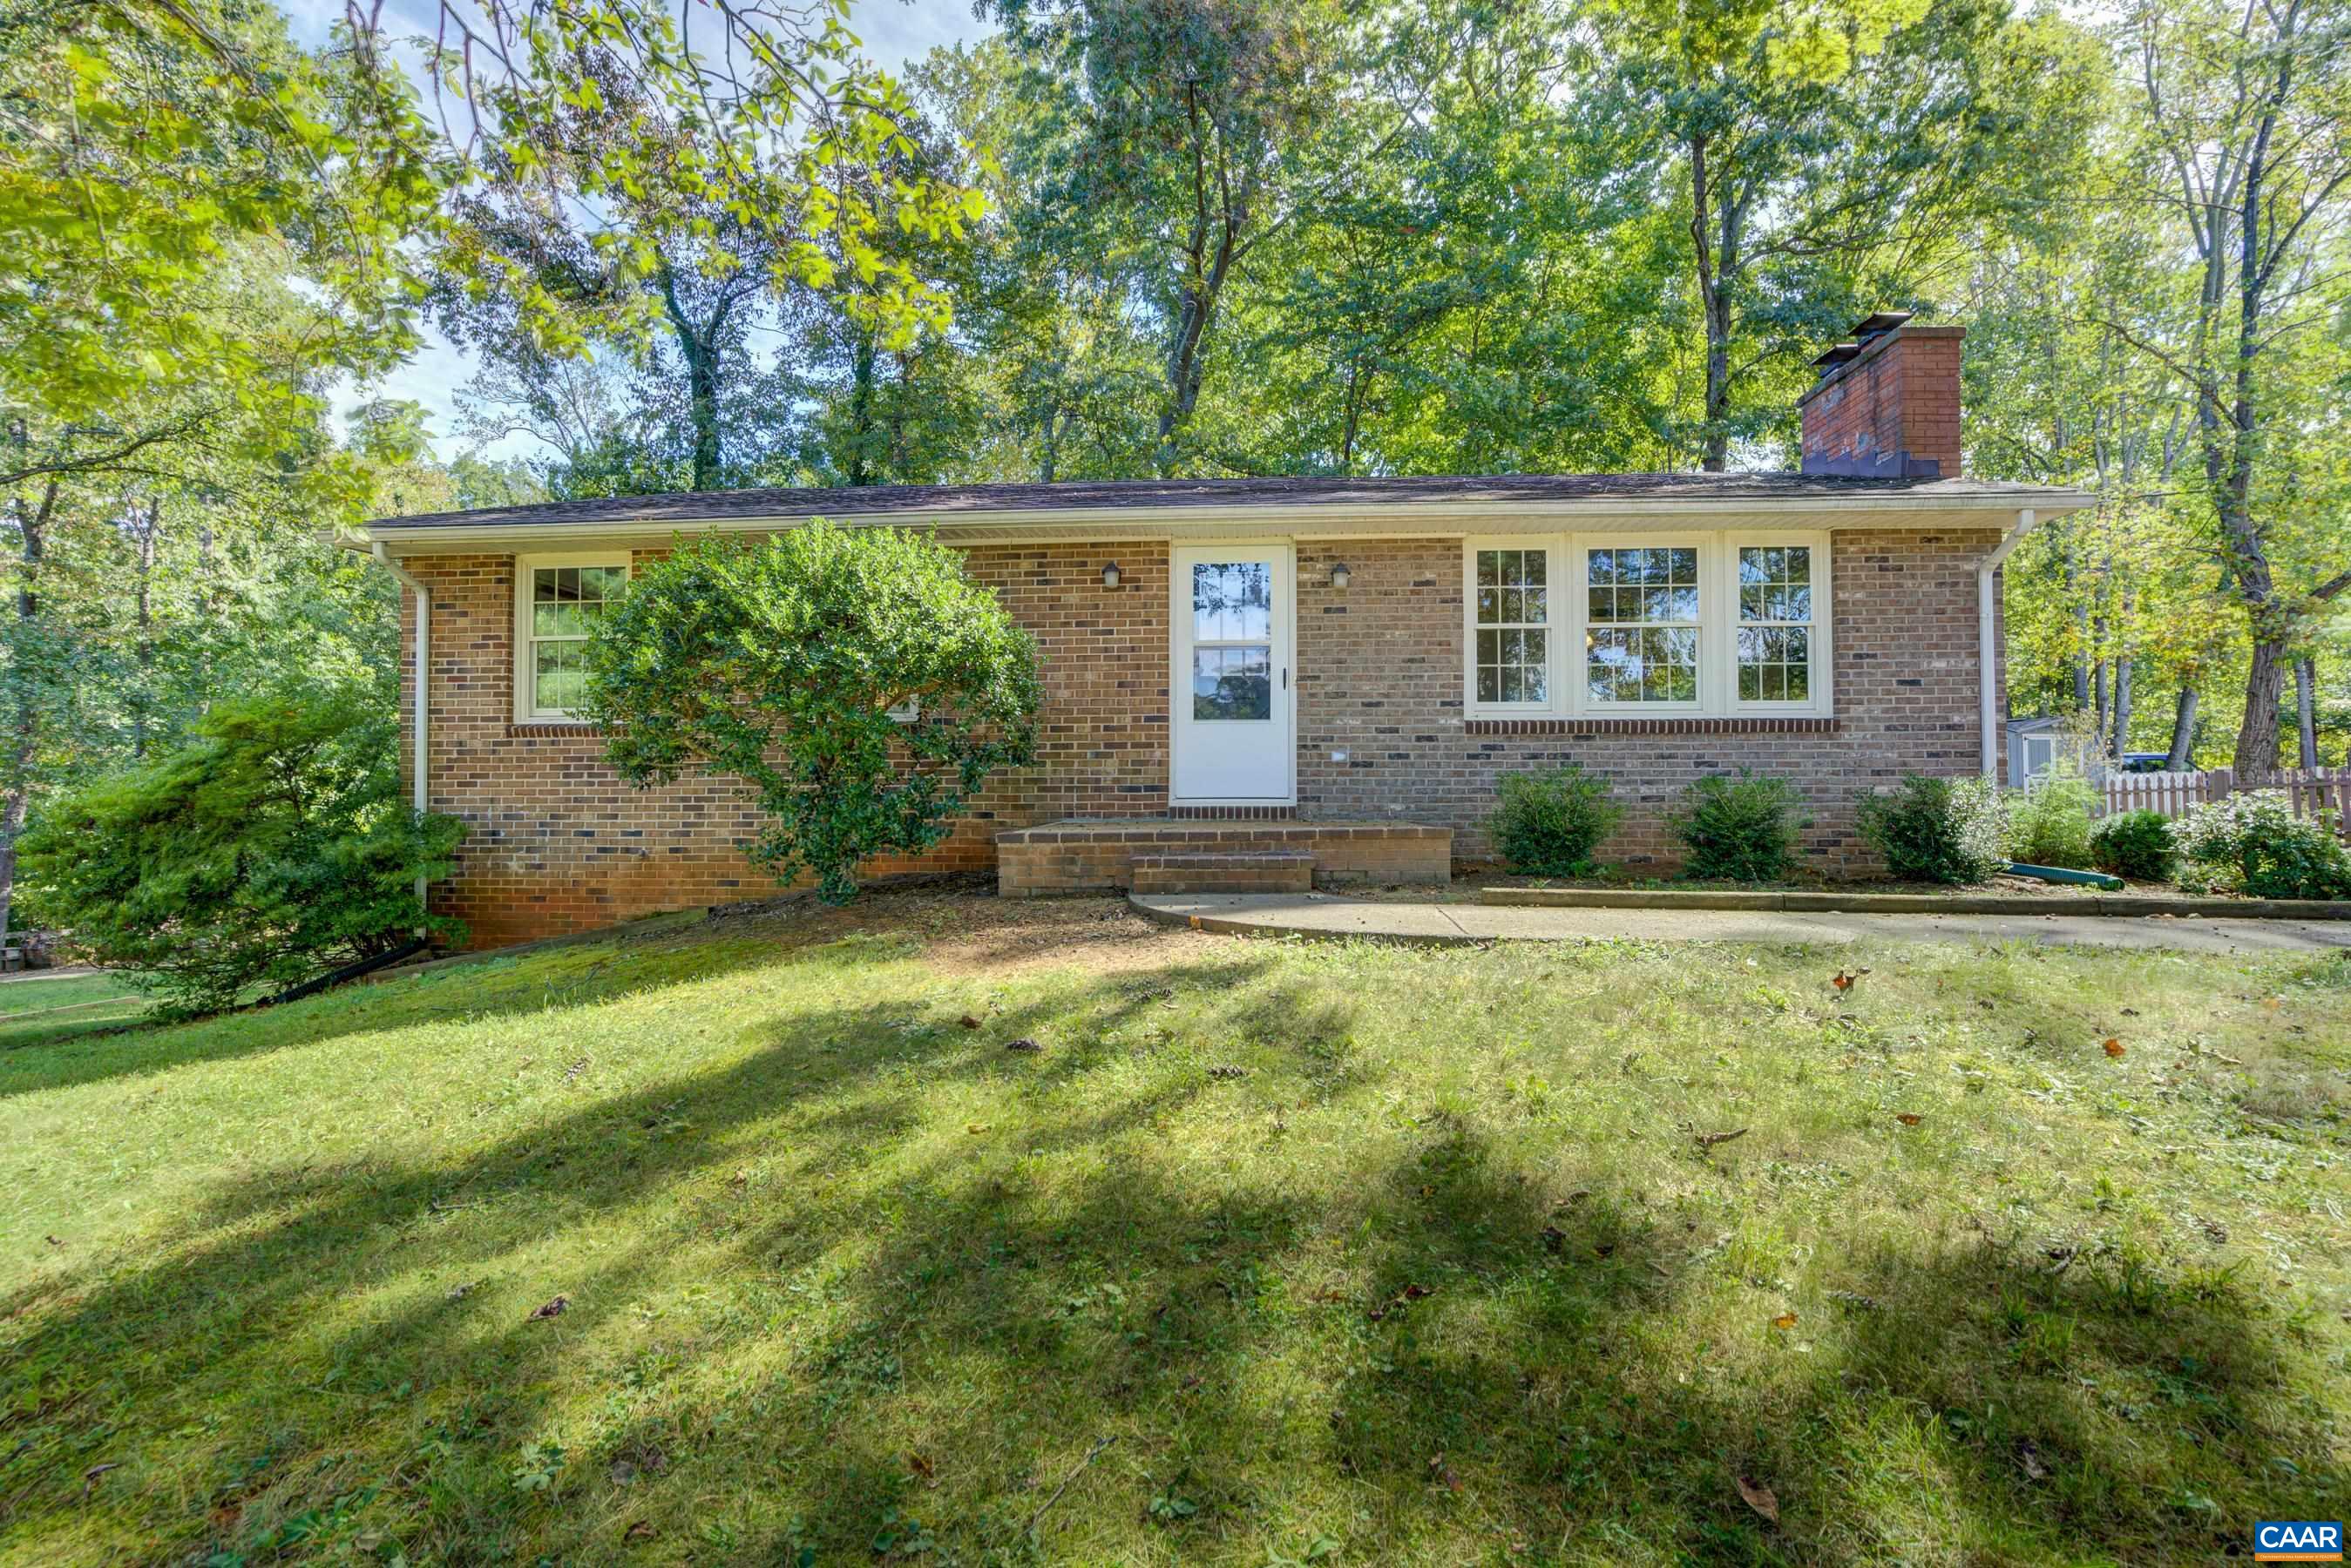 Lovingly maintained all-brick home on half an acre just minutes from the popular Chris Greene Lake.